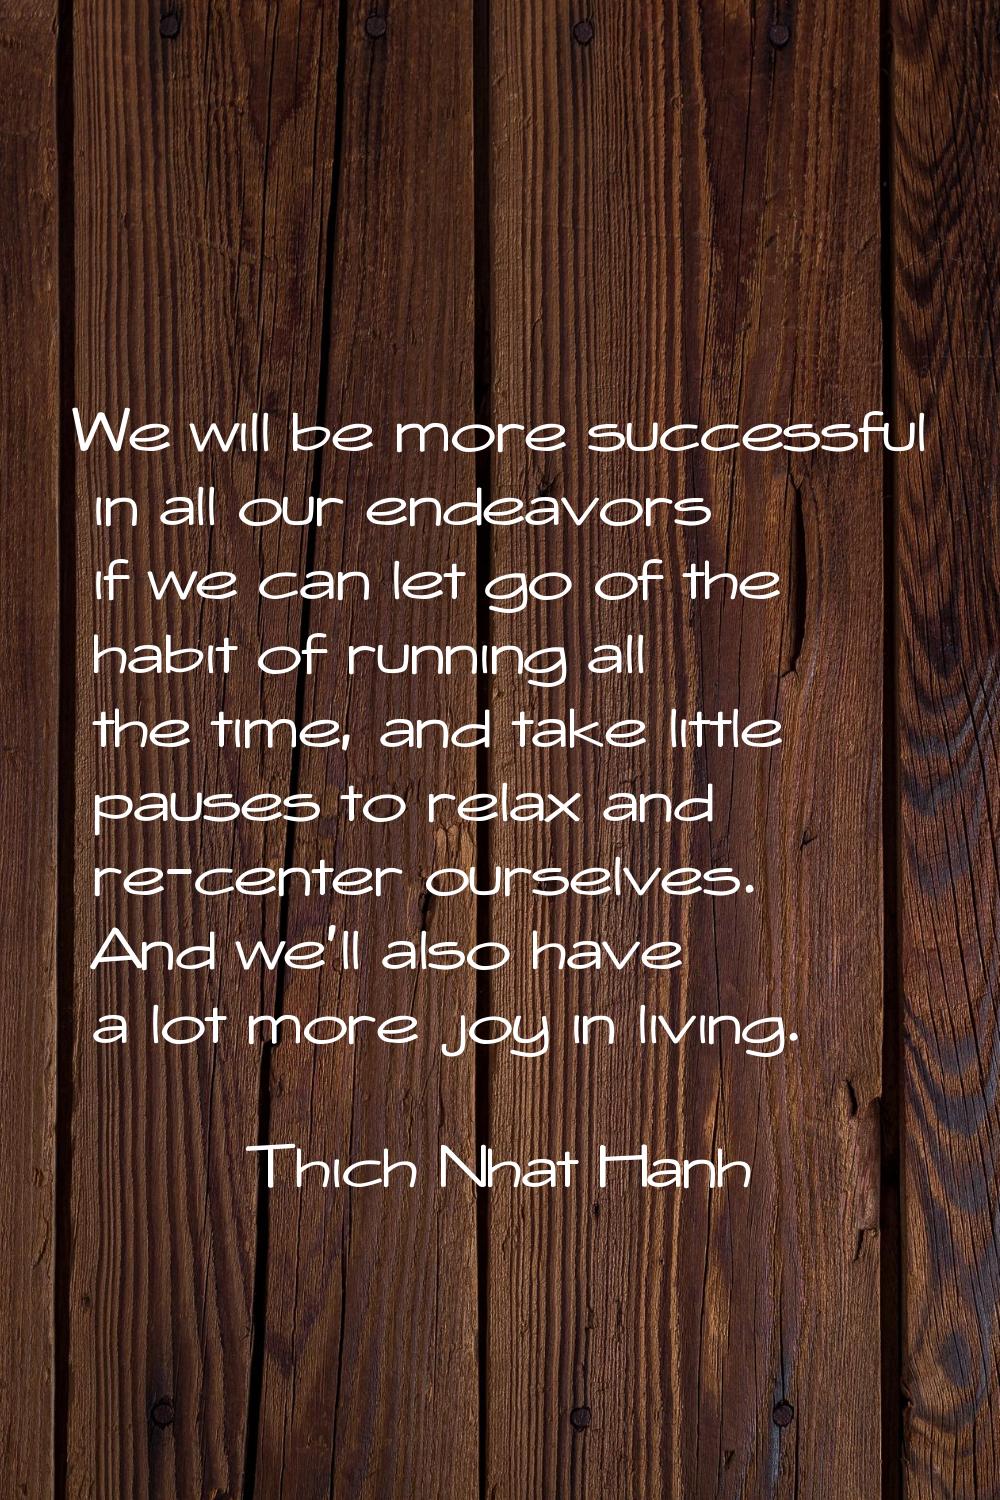 We will be more successful in all our endeavors if we can let go of the habit of running all the ti